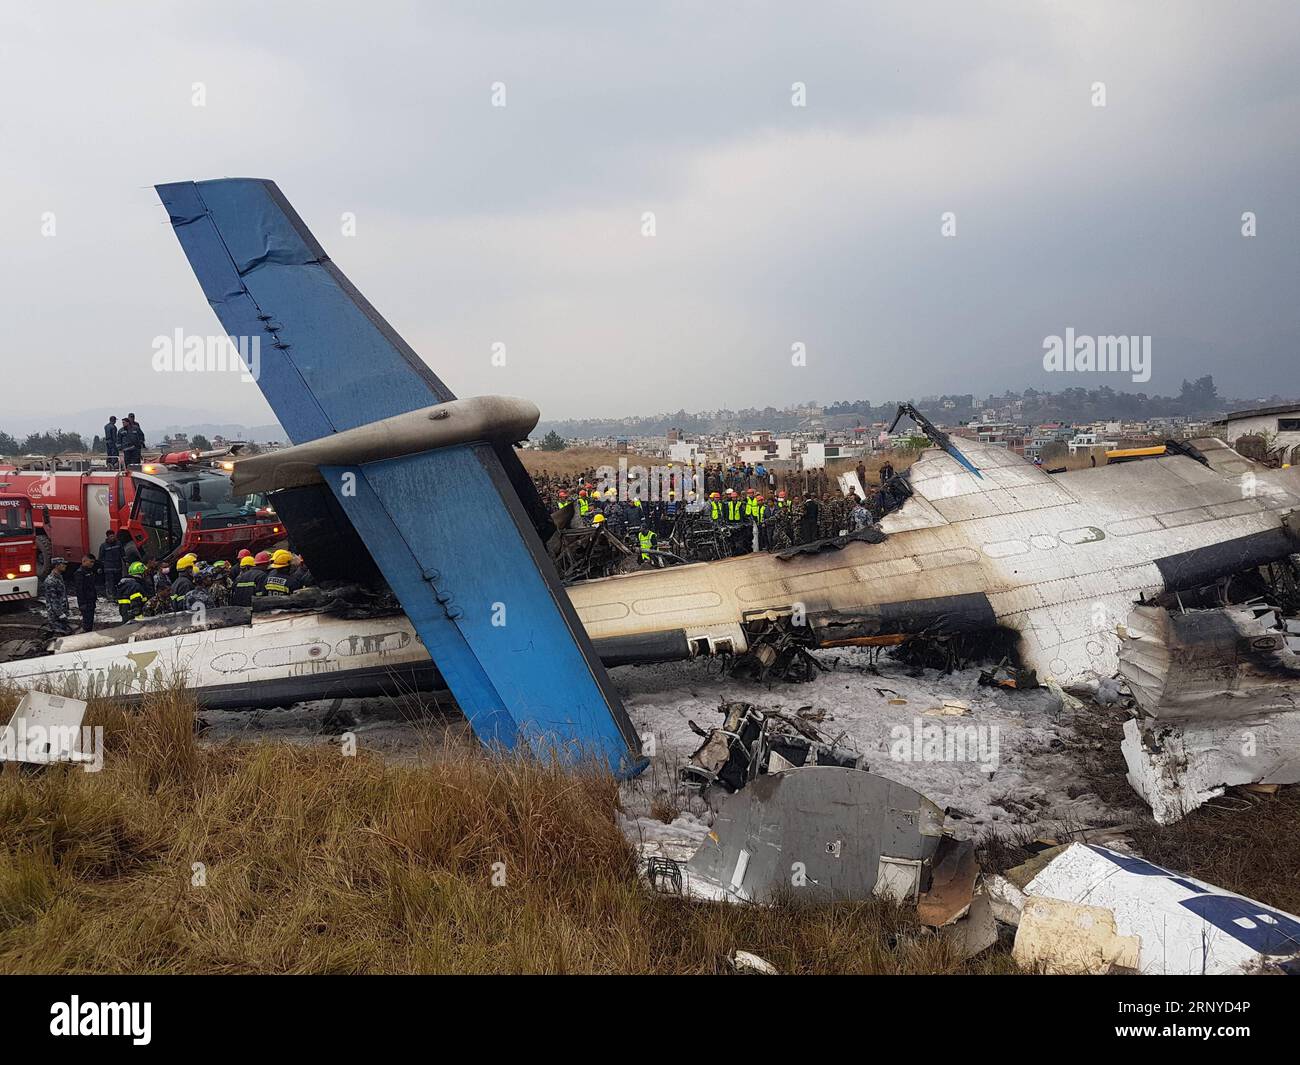 (180312) -- KATHMANDU, March 12, 2018 () -- Photo taken on March 12, 2018 shows the crash-landing site in Kathmandu, Nepal. A passenger plane of the US-Bangla Airlines crashed at Nepal s Tribhuvan International Airport (TIA) on Monday, with dozens feared dead and at least 17 people injured. () (zjl) NEPAL-KATHMANDU-AIR CRASH Xinhua PUBLICATIONxNOTxINxCHN Stock Photo